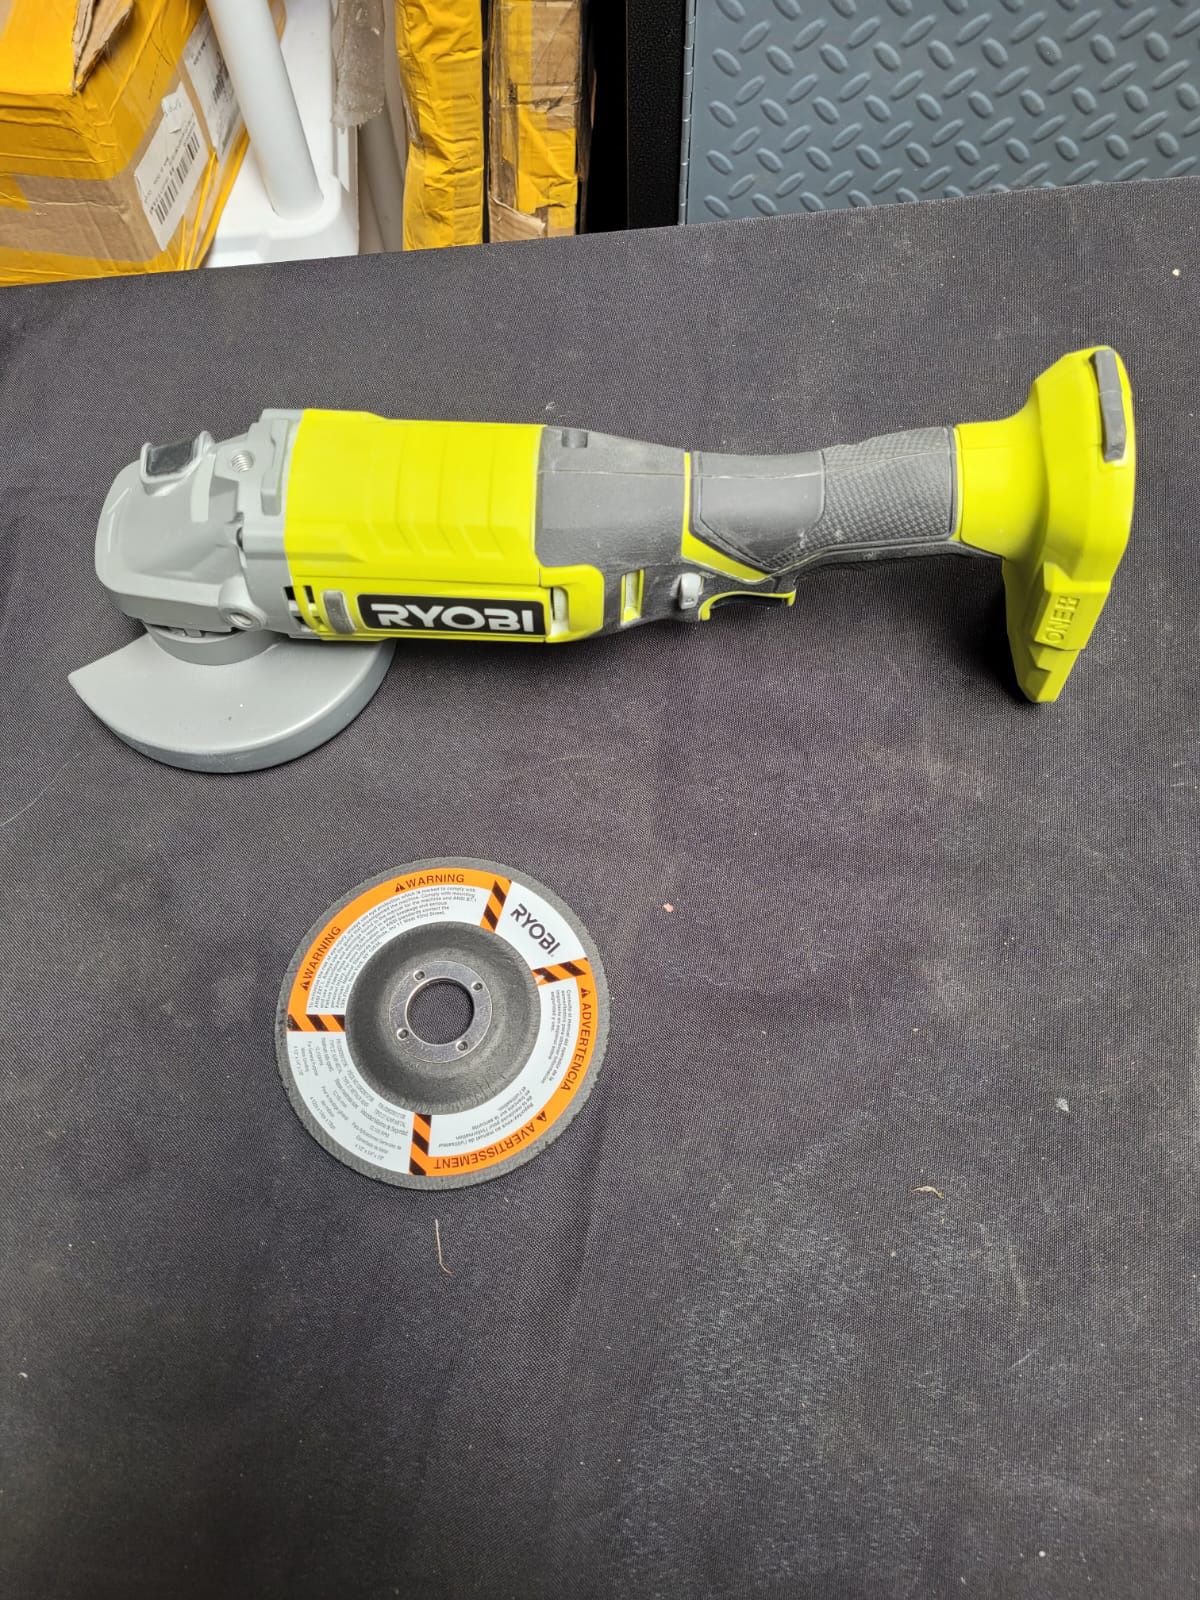 ONE+ 18V Cordless 4-1/2 in. Angle Grinder (Tool Only)